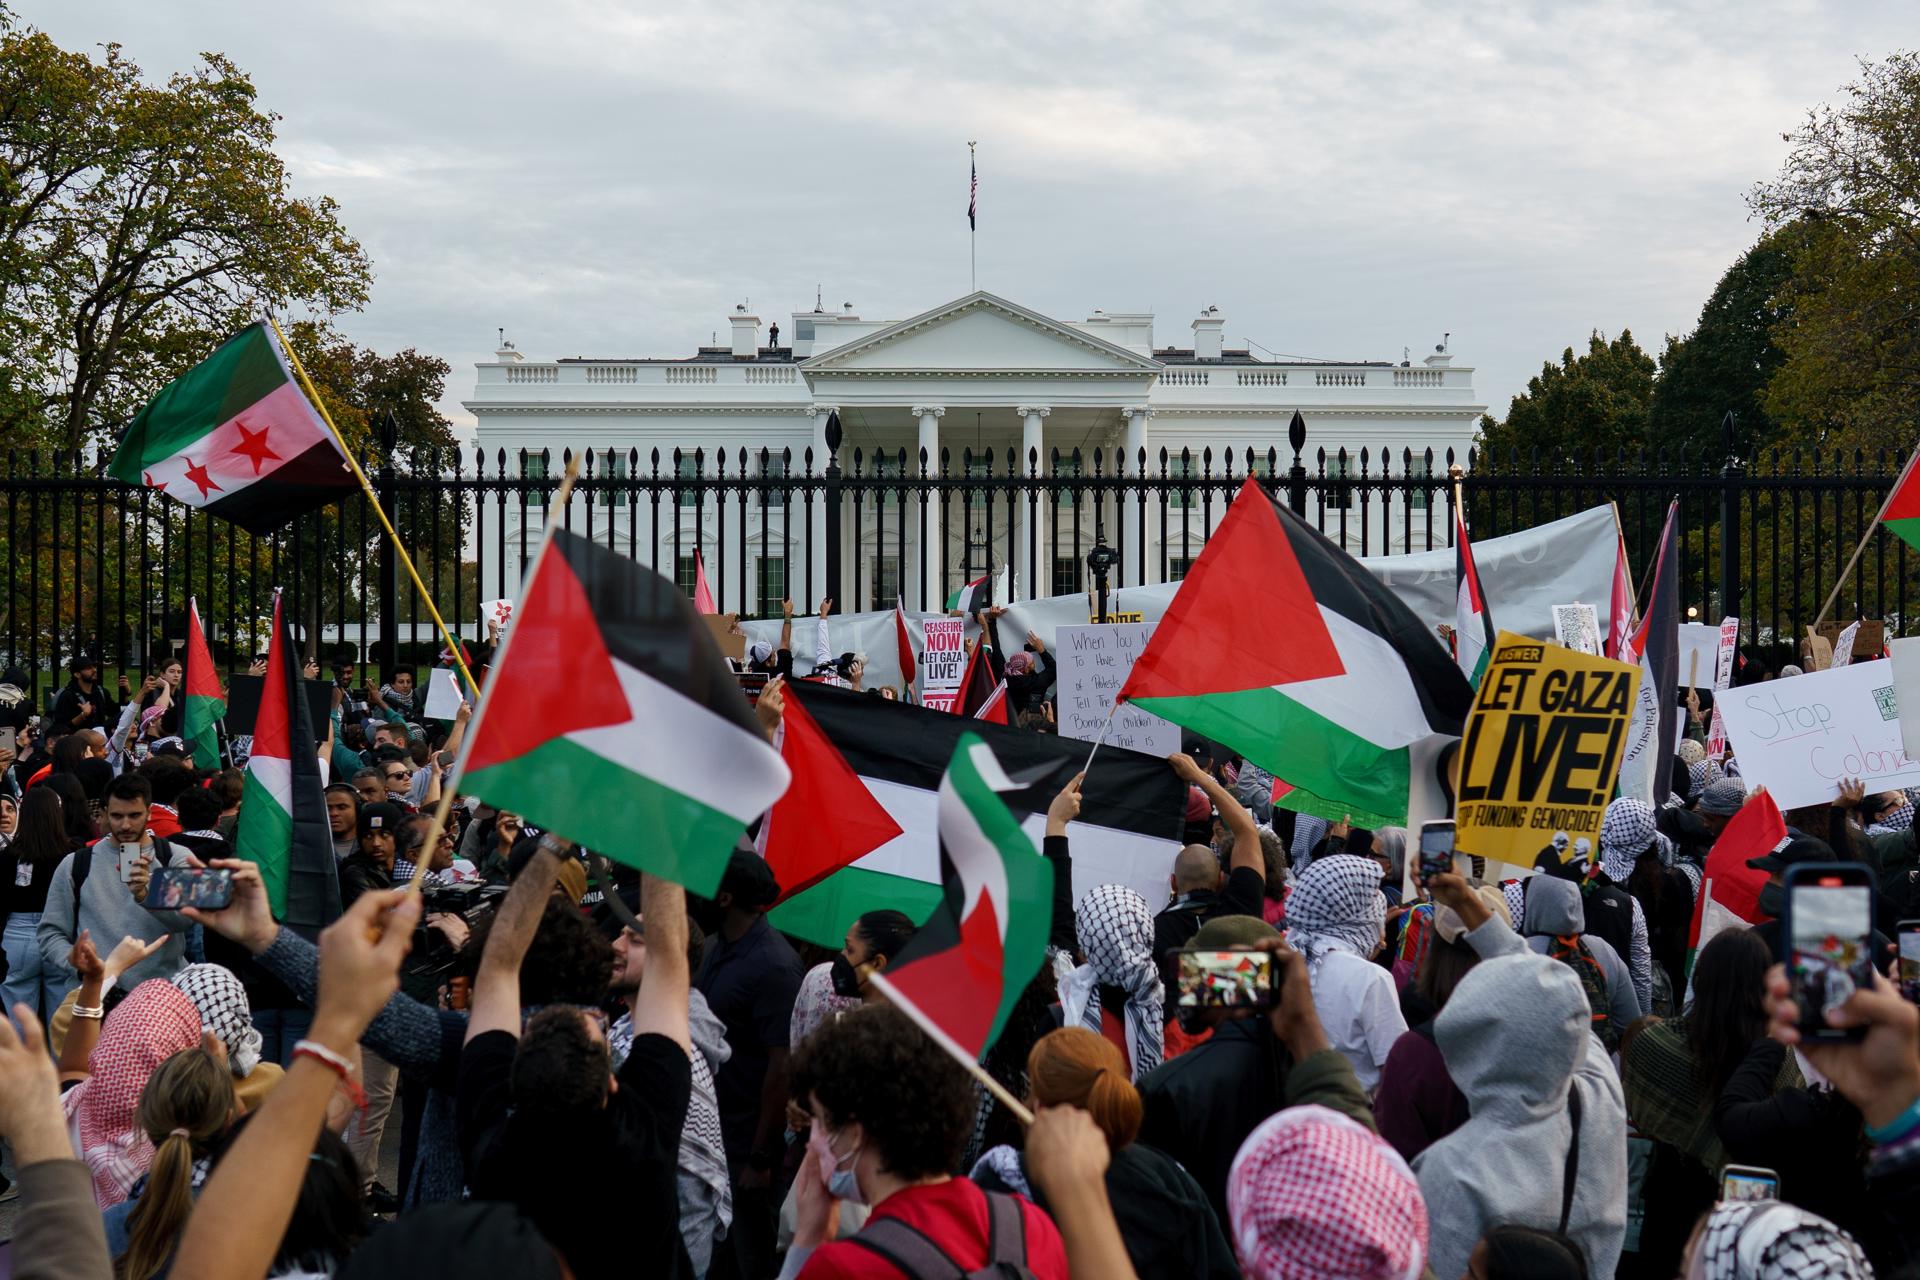 Protests near White House reflect growing discontent (Credits: EFE-EPA)